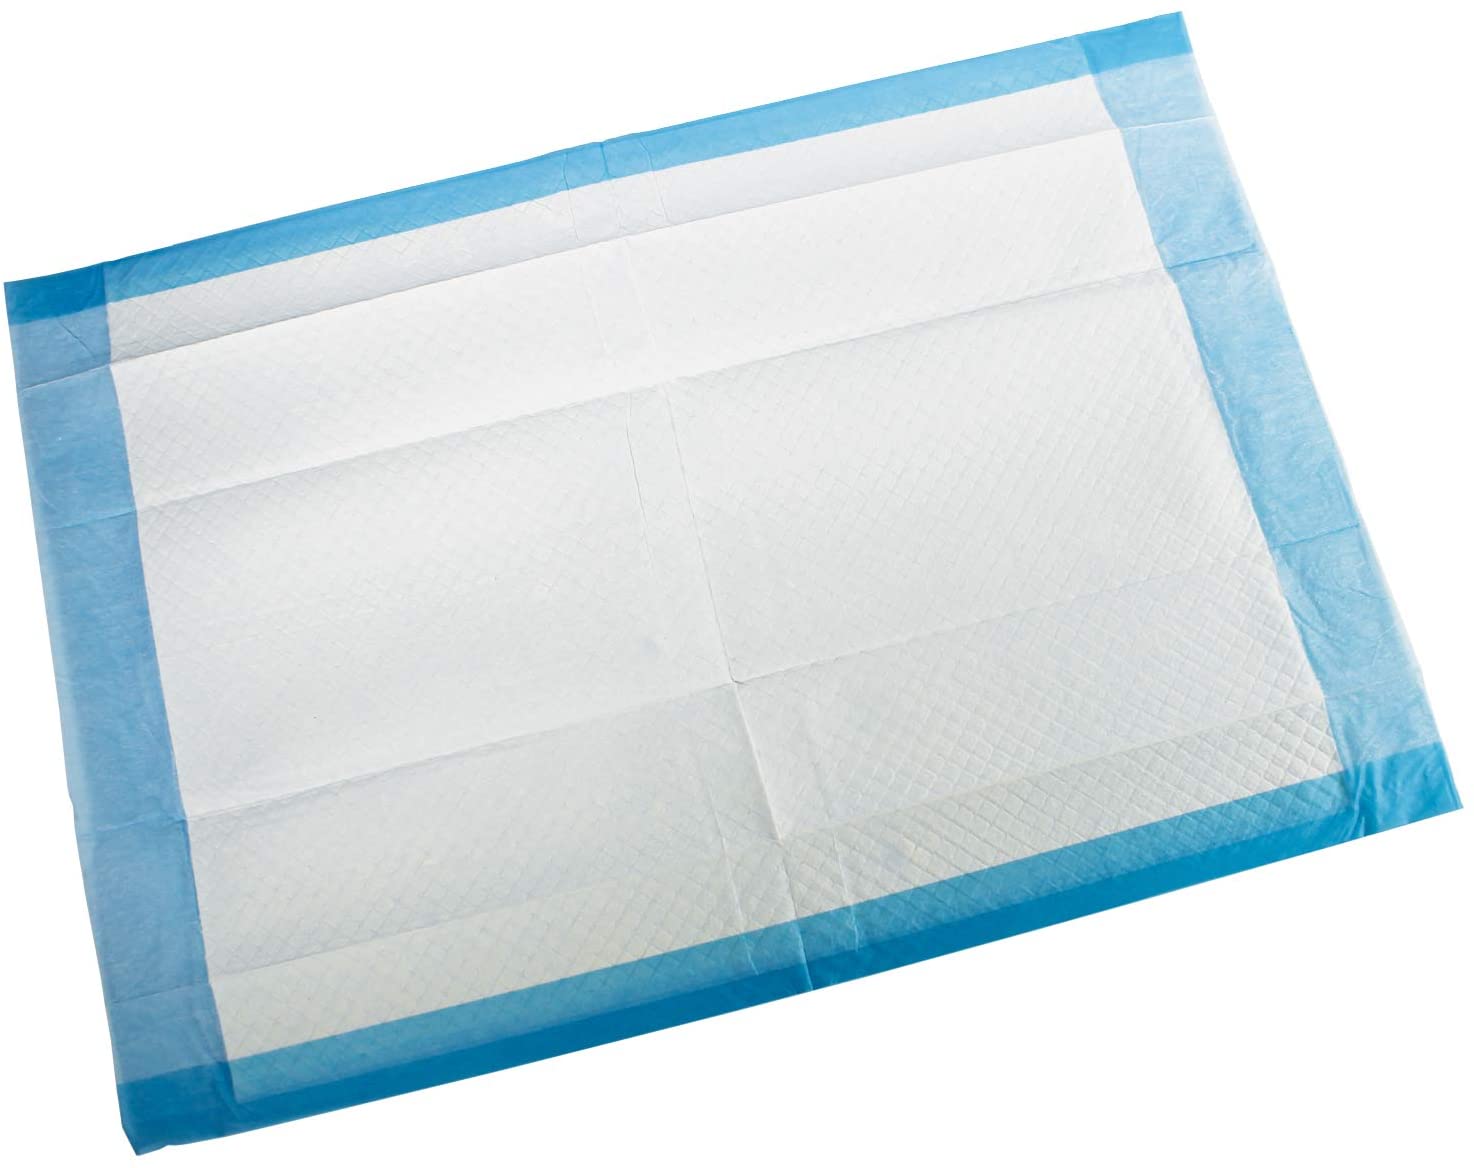 Super Absorbent Protection Disposable Incontinence Underpad for Elderly